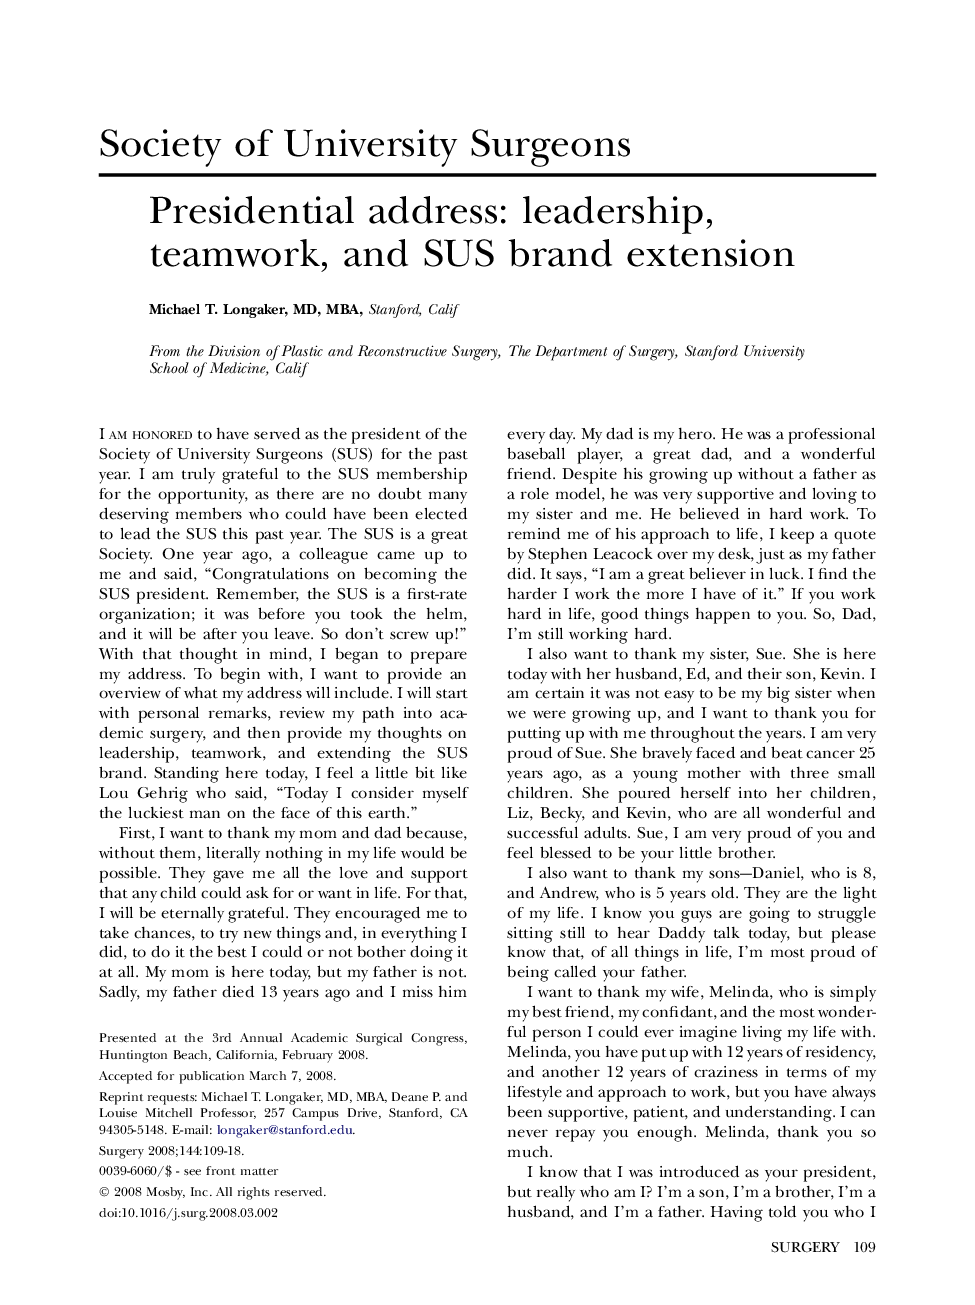 Presidential address: leadership, teamwork, and SUS brand extension